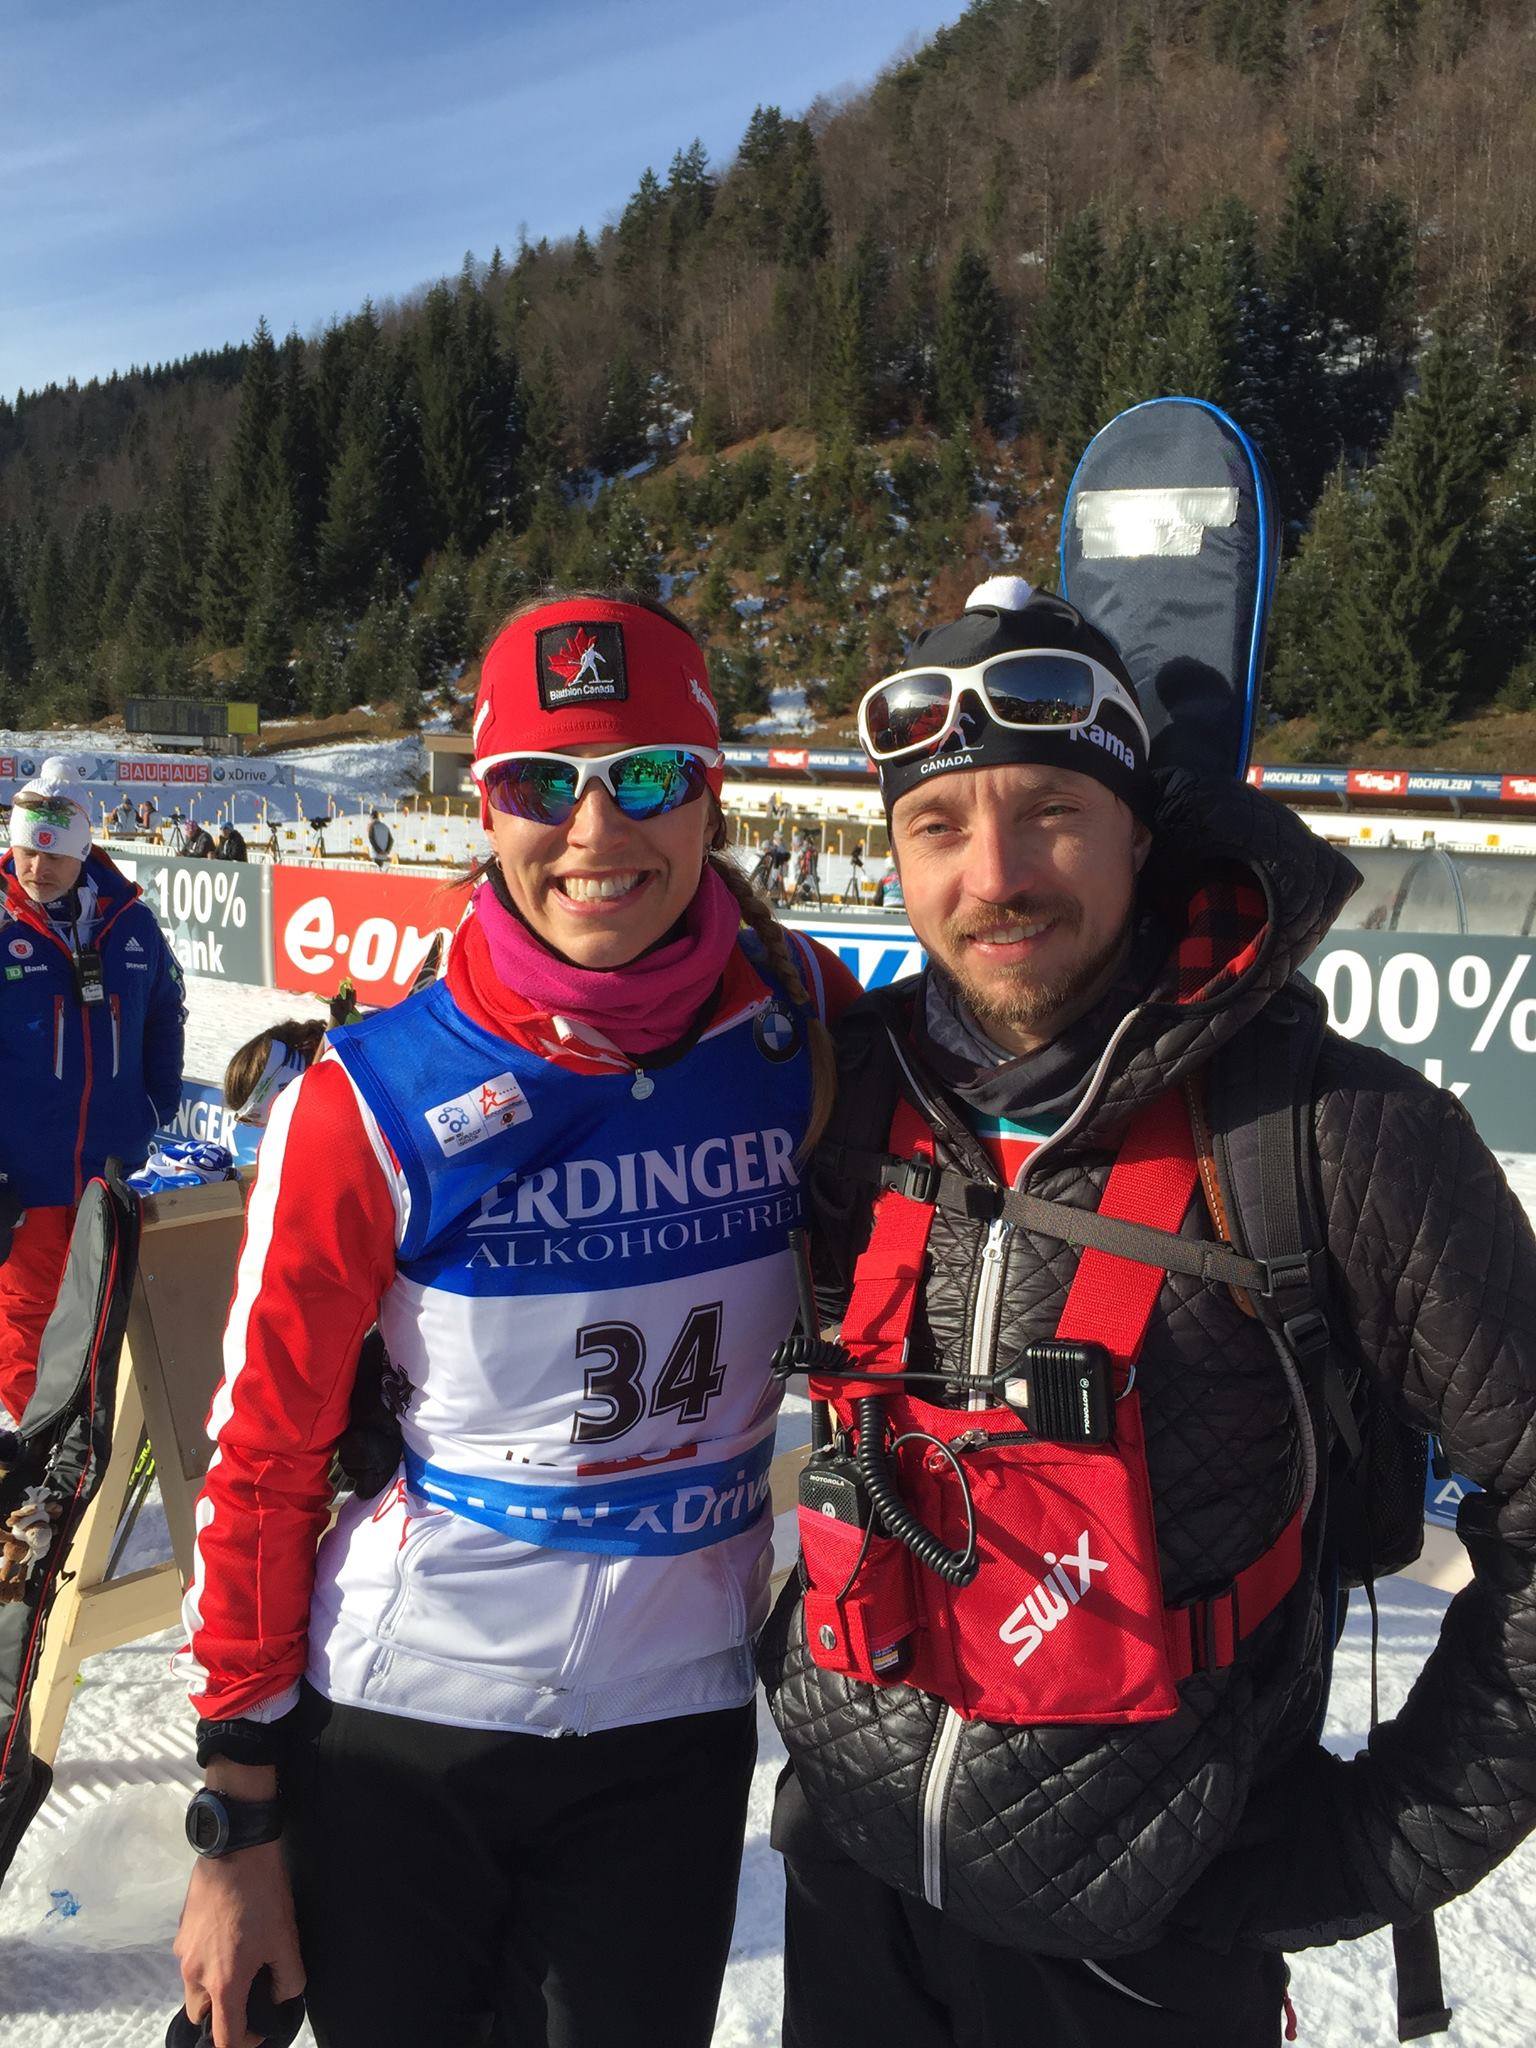 Rosanna Crawford with coach Roddy Ward after placing a career-best fifth in the IBU World Cup 10 k pursuit on Sunday in Hochfilzen, Austria. “Such a fun race today, I moved from 34th to 5th for a new personal best with 19-for-20 shooting,” Crawford wrote on Facebook. (Photo: Chris Lindsay)